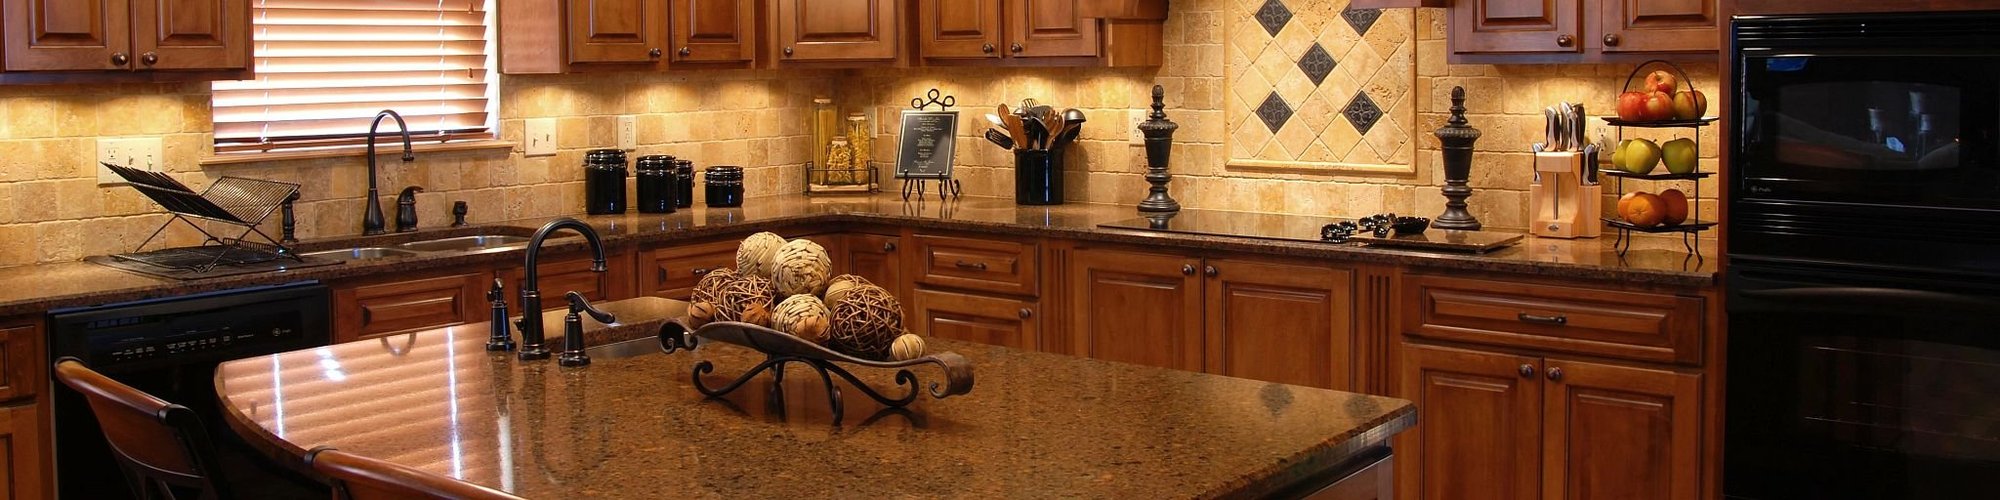 Quality cabinetry products at Shelbyville Paint